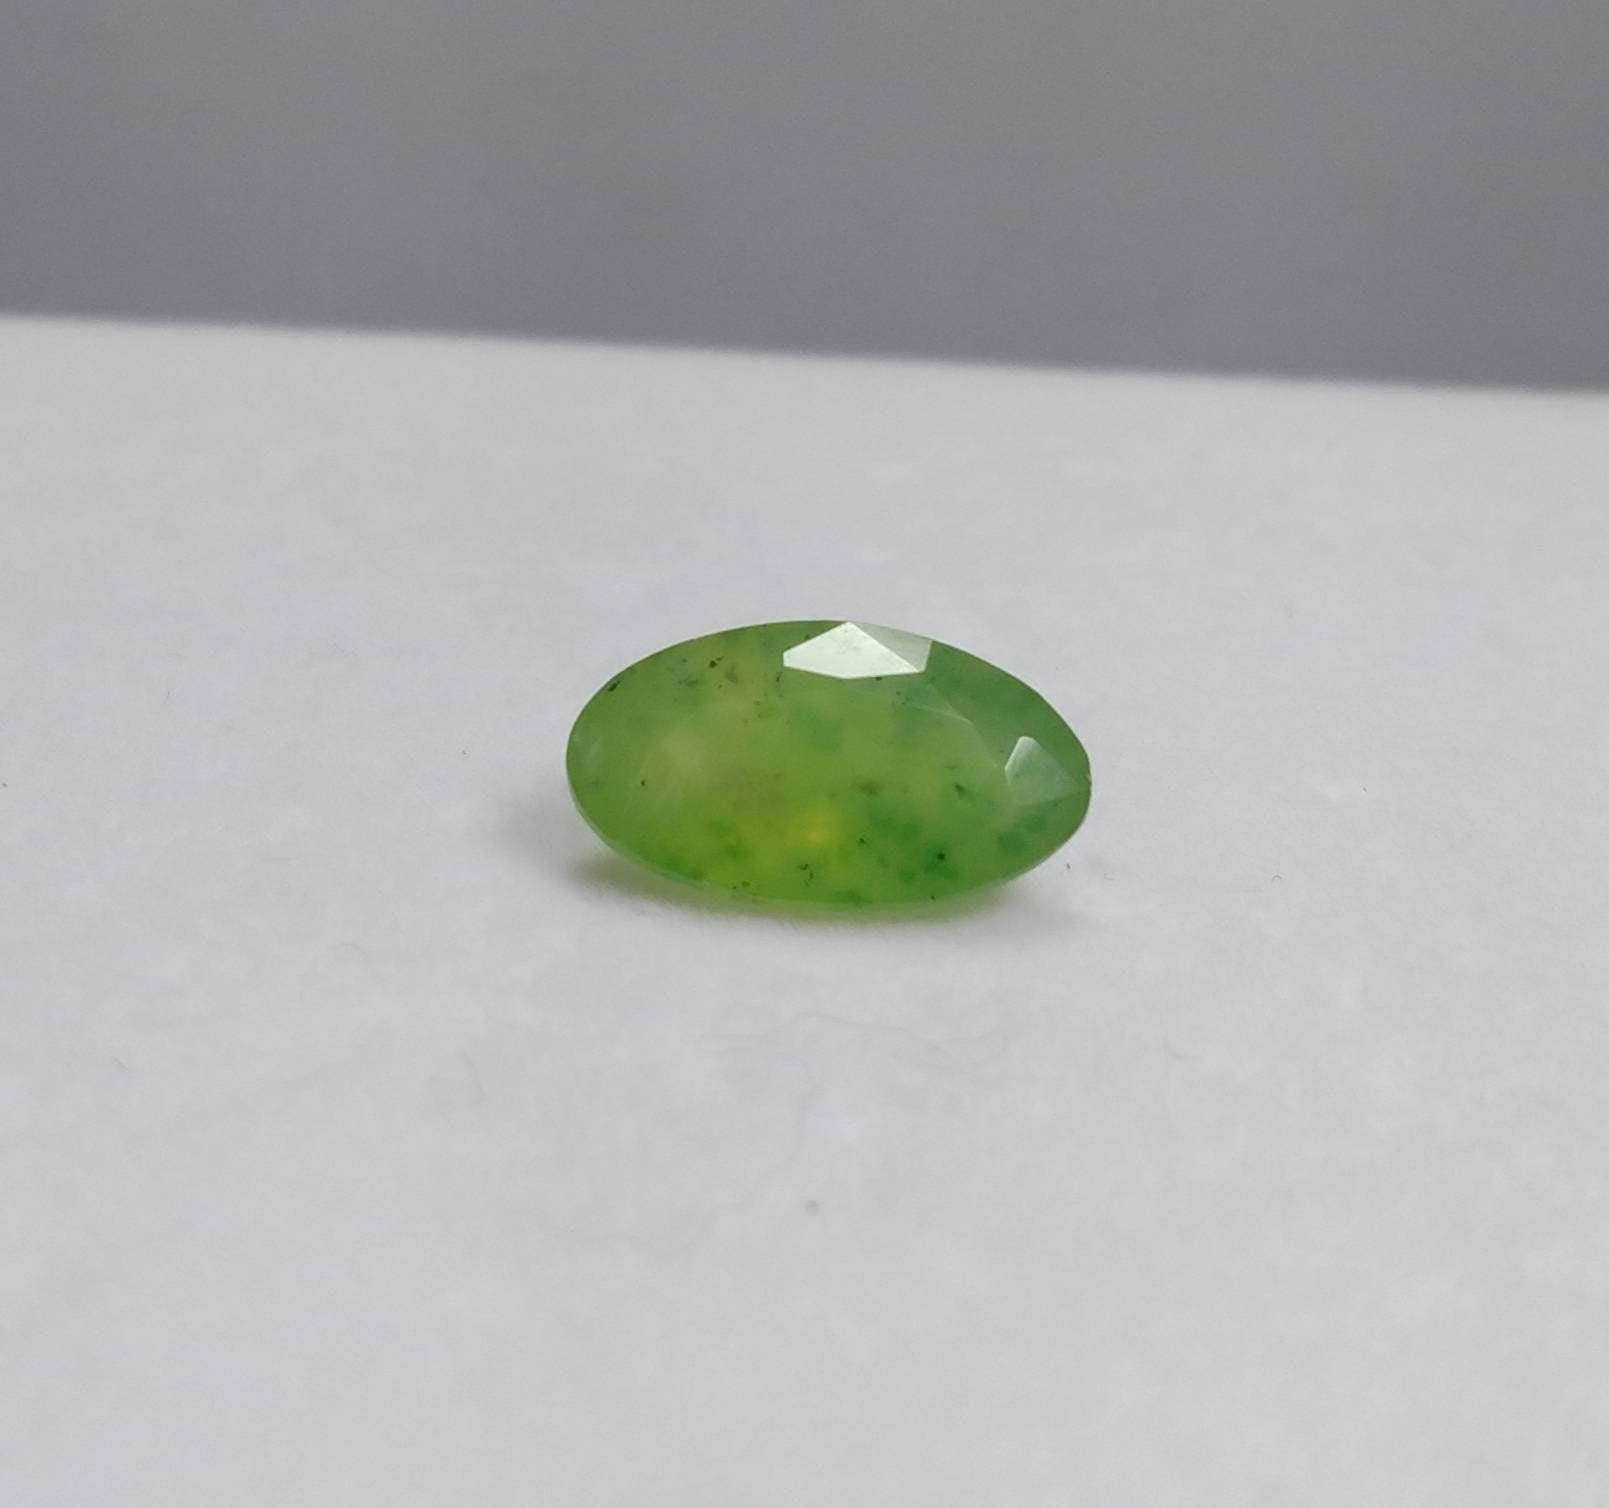 ARSAA GEMS AND MINERALSNatural fine quality beautiful 5.5 carats green oval cut shape Faceted hydrograssular garnet gem - Premium  from ARSAA GEMS AND MINERALS - Just $16.00! Shop now at ARSAA GEMS AND MINERALS